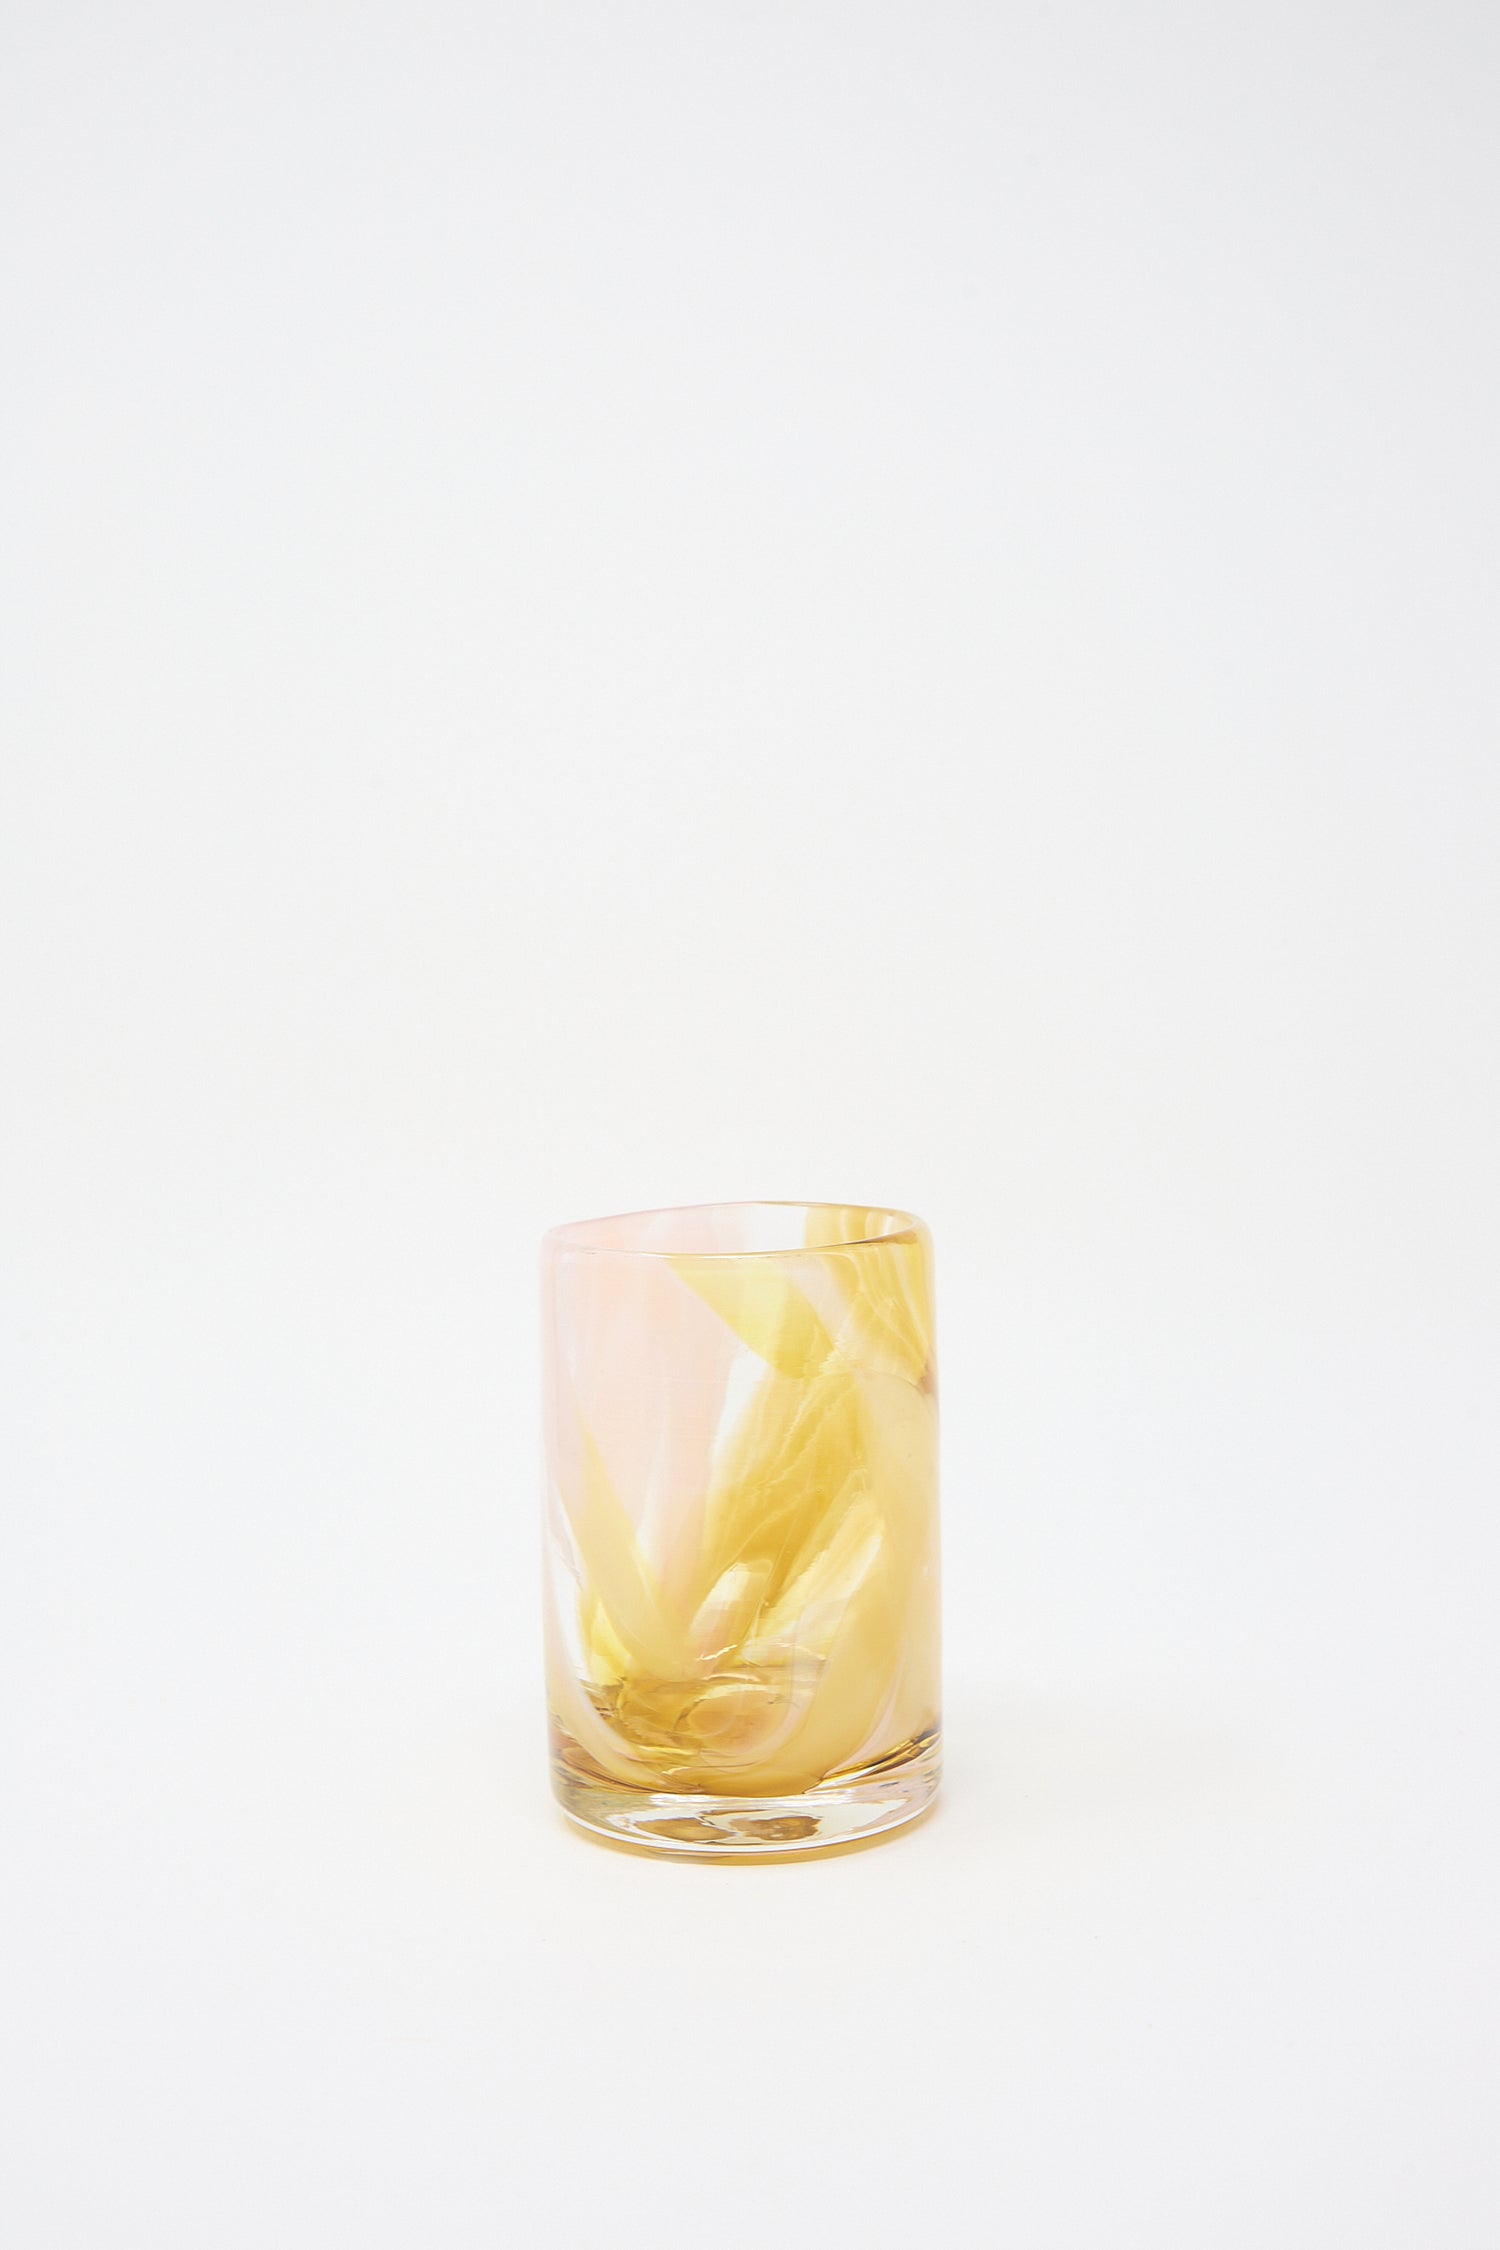 A Frankie Cup by Upstate, hand-blown glass tumbler half-filled with a yellow liquid and ice against a white background.